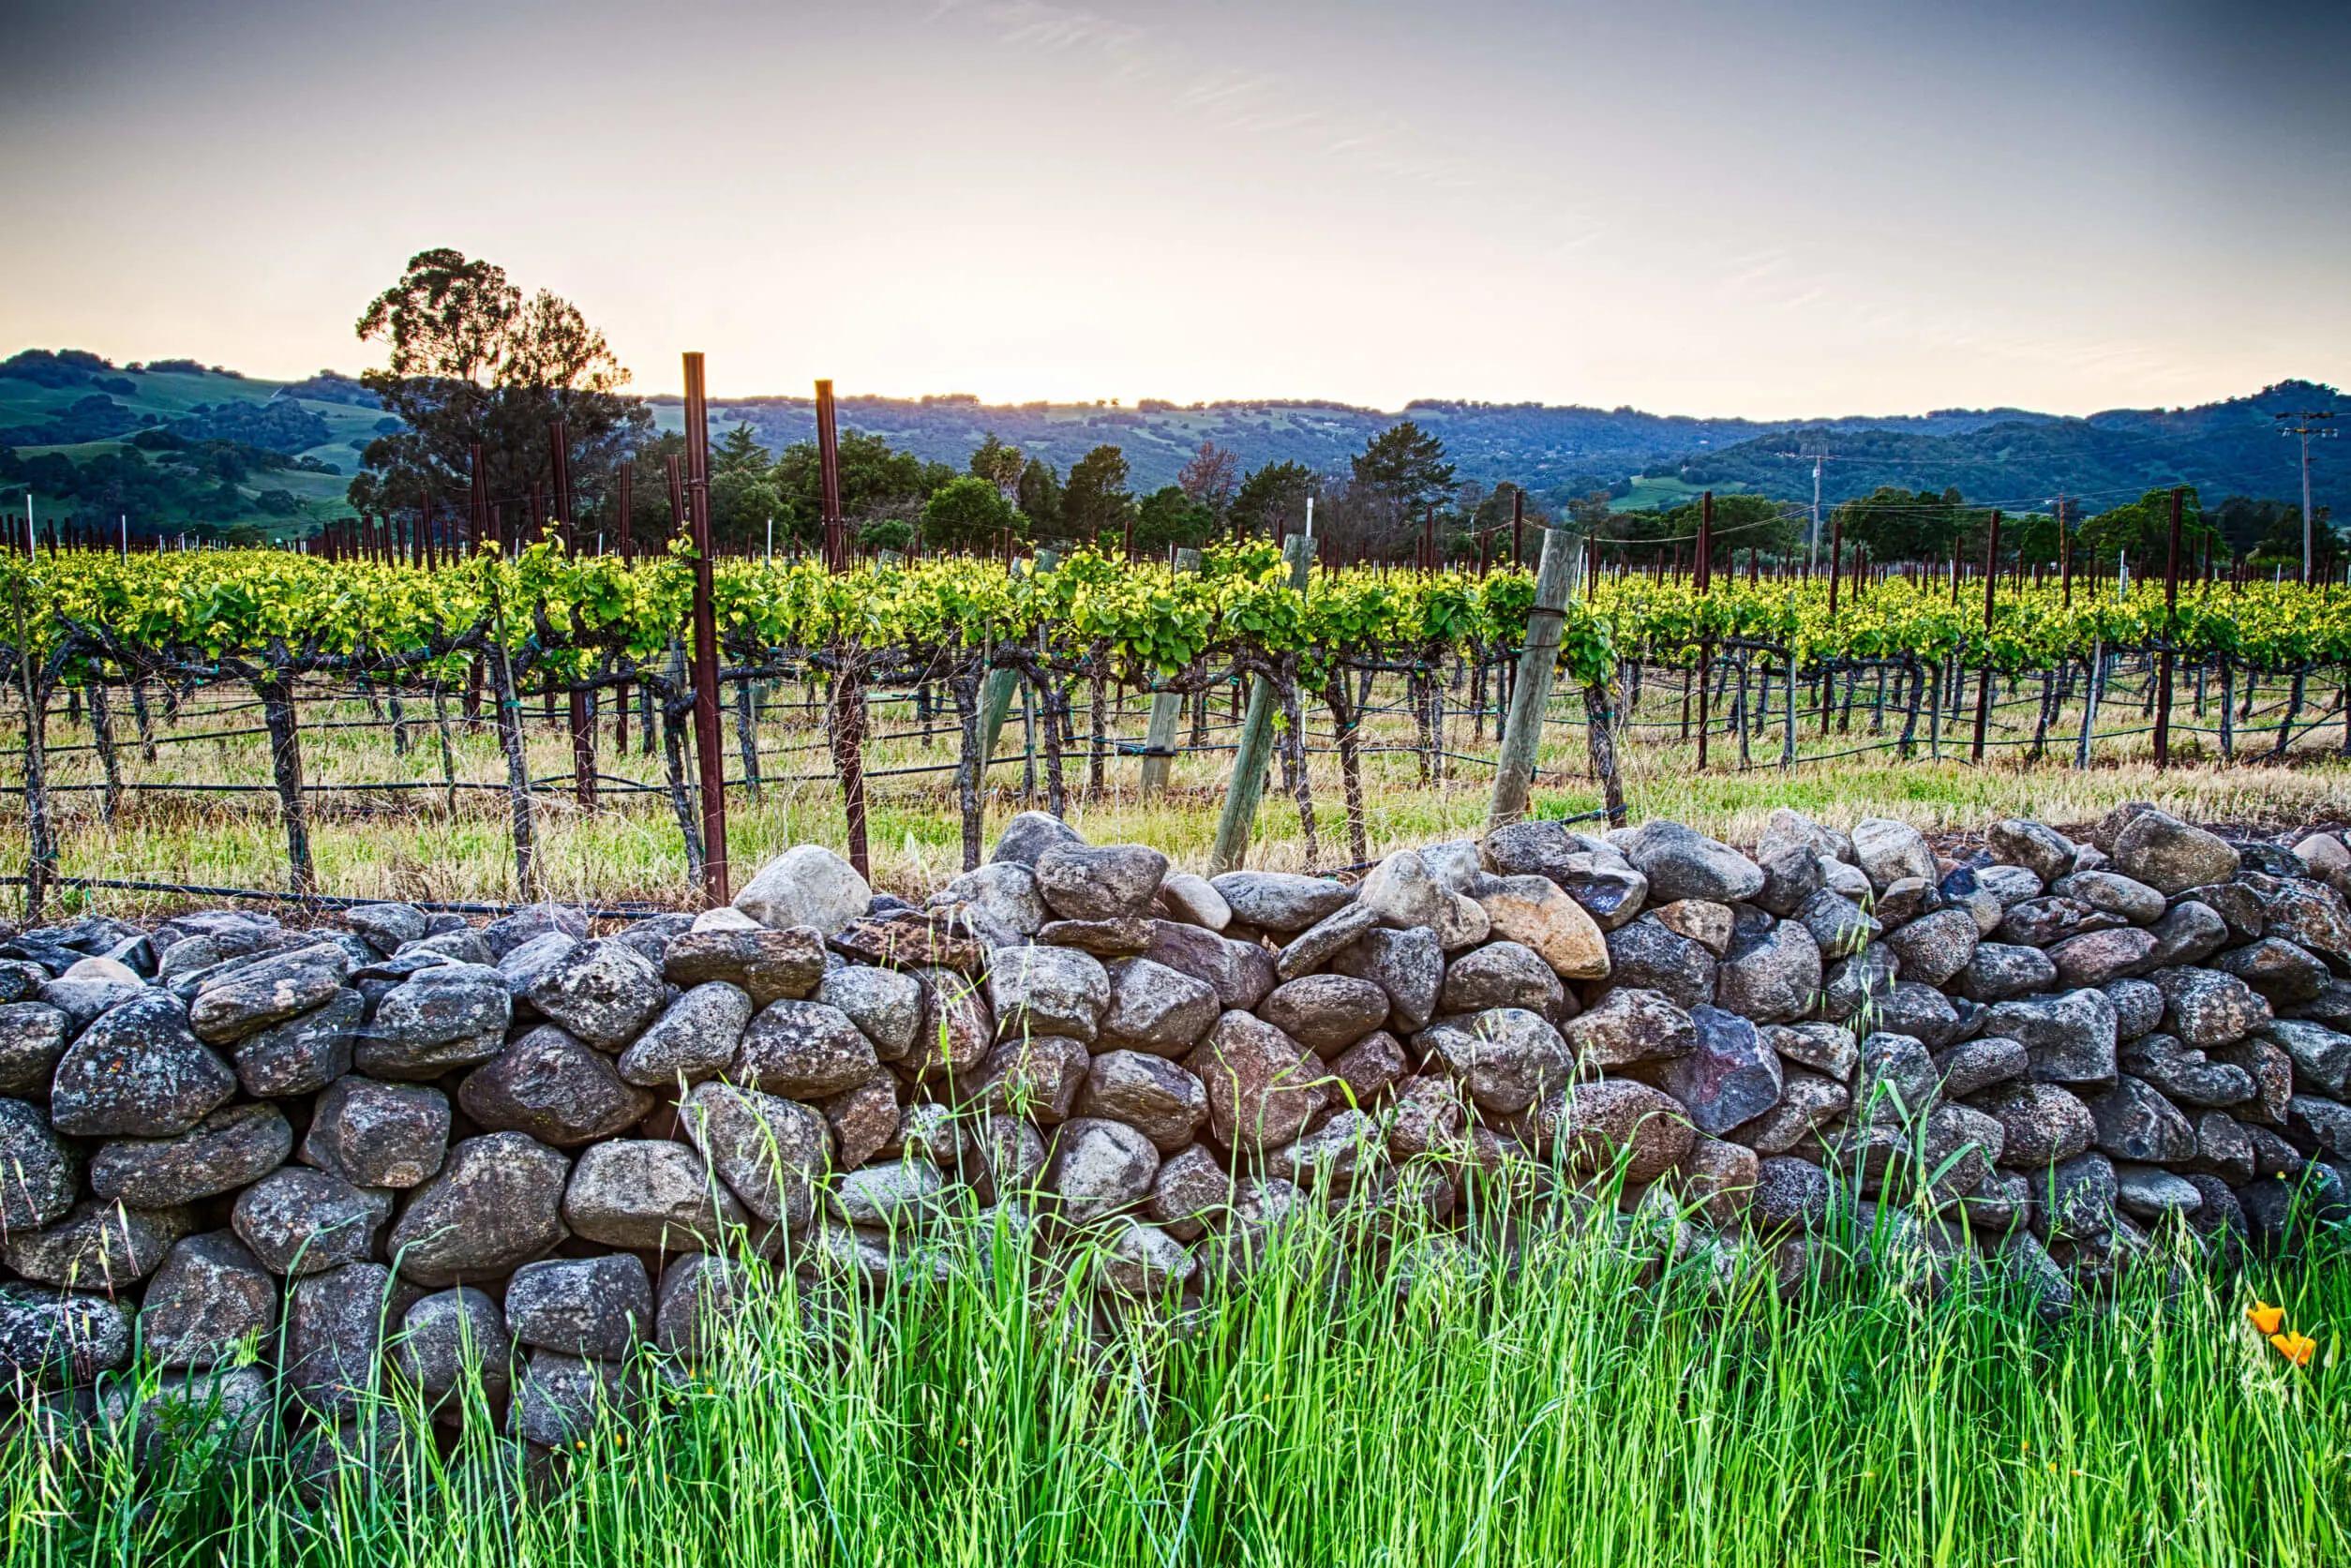 Sunset over vineyards in California's wine country. Sonoma county, California